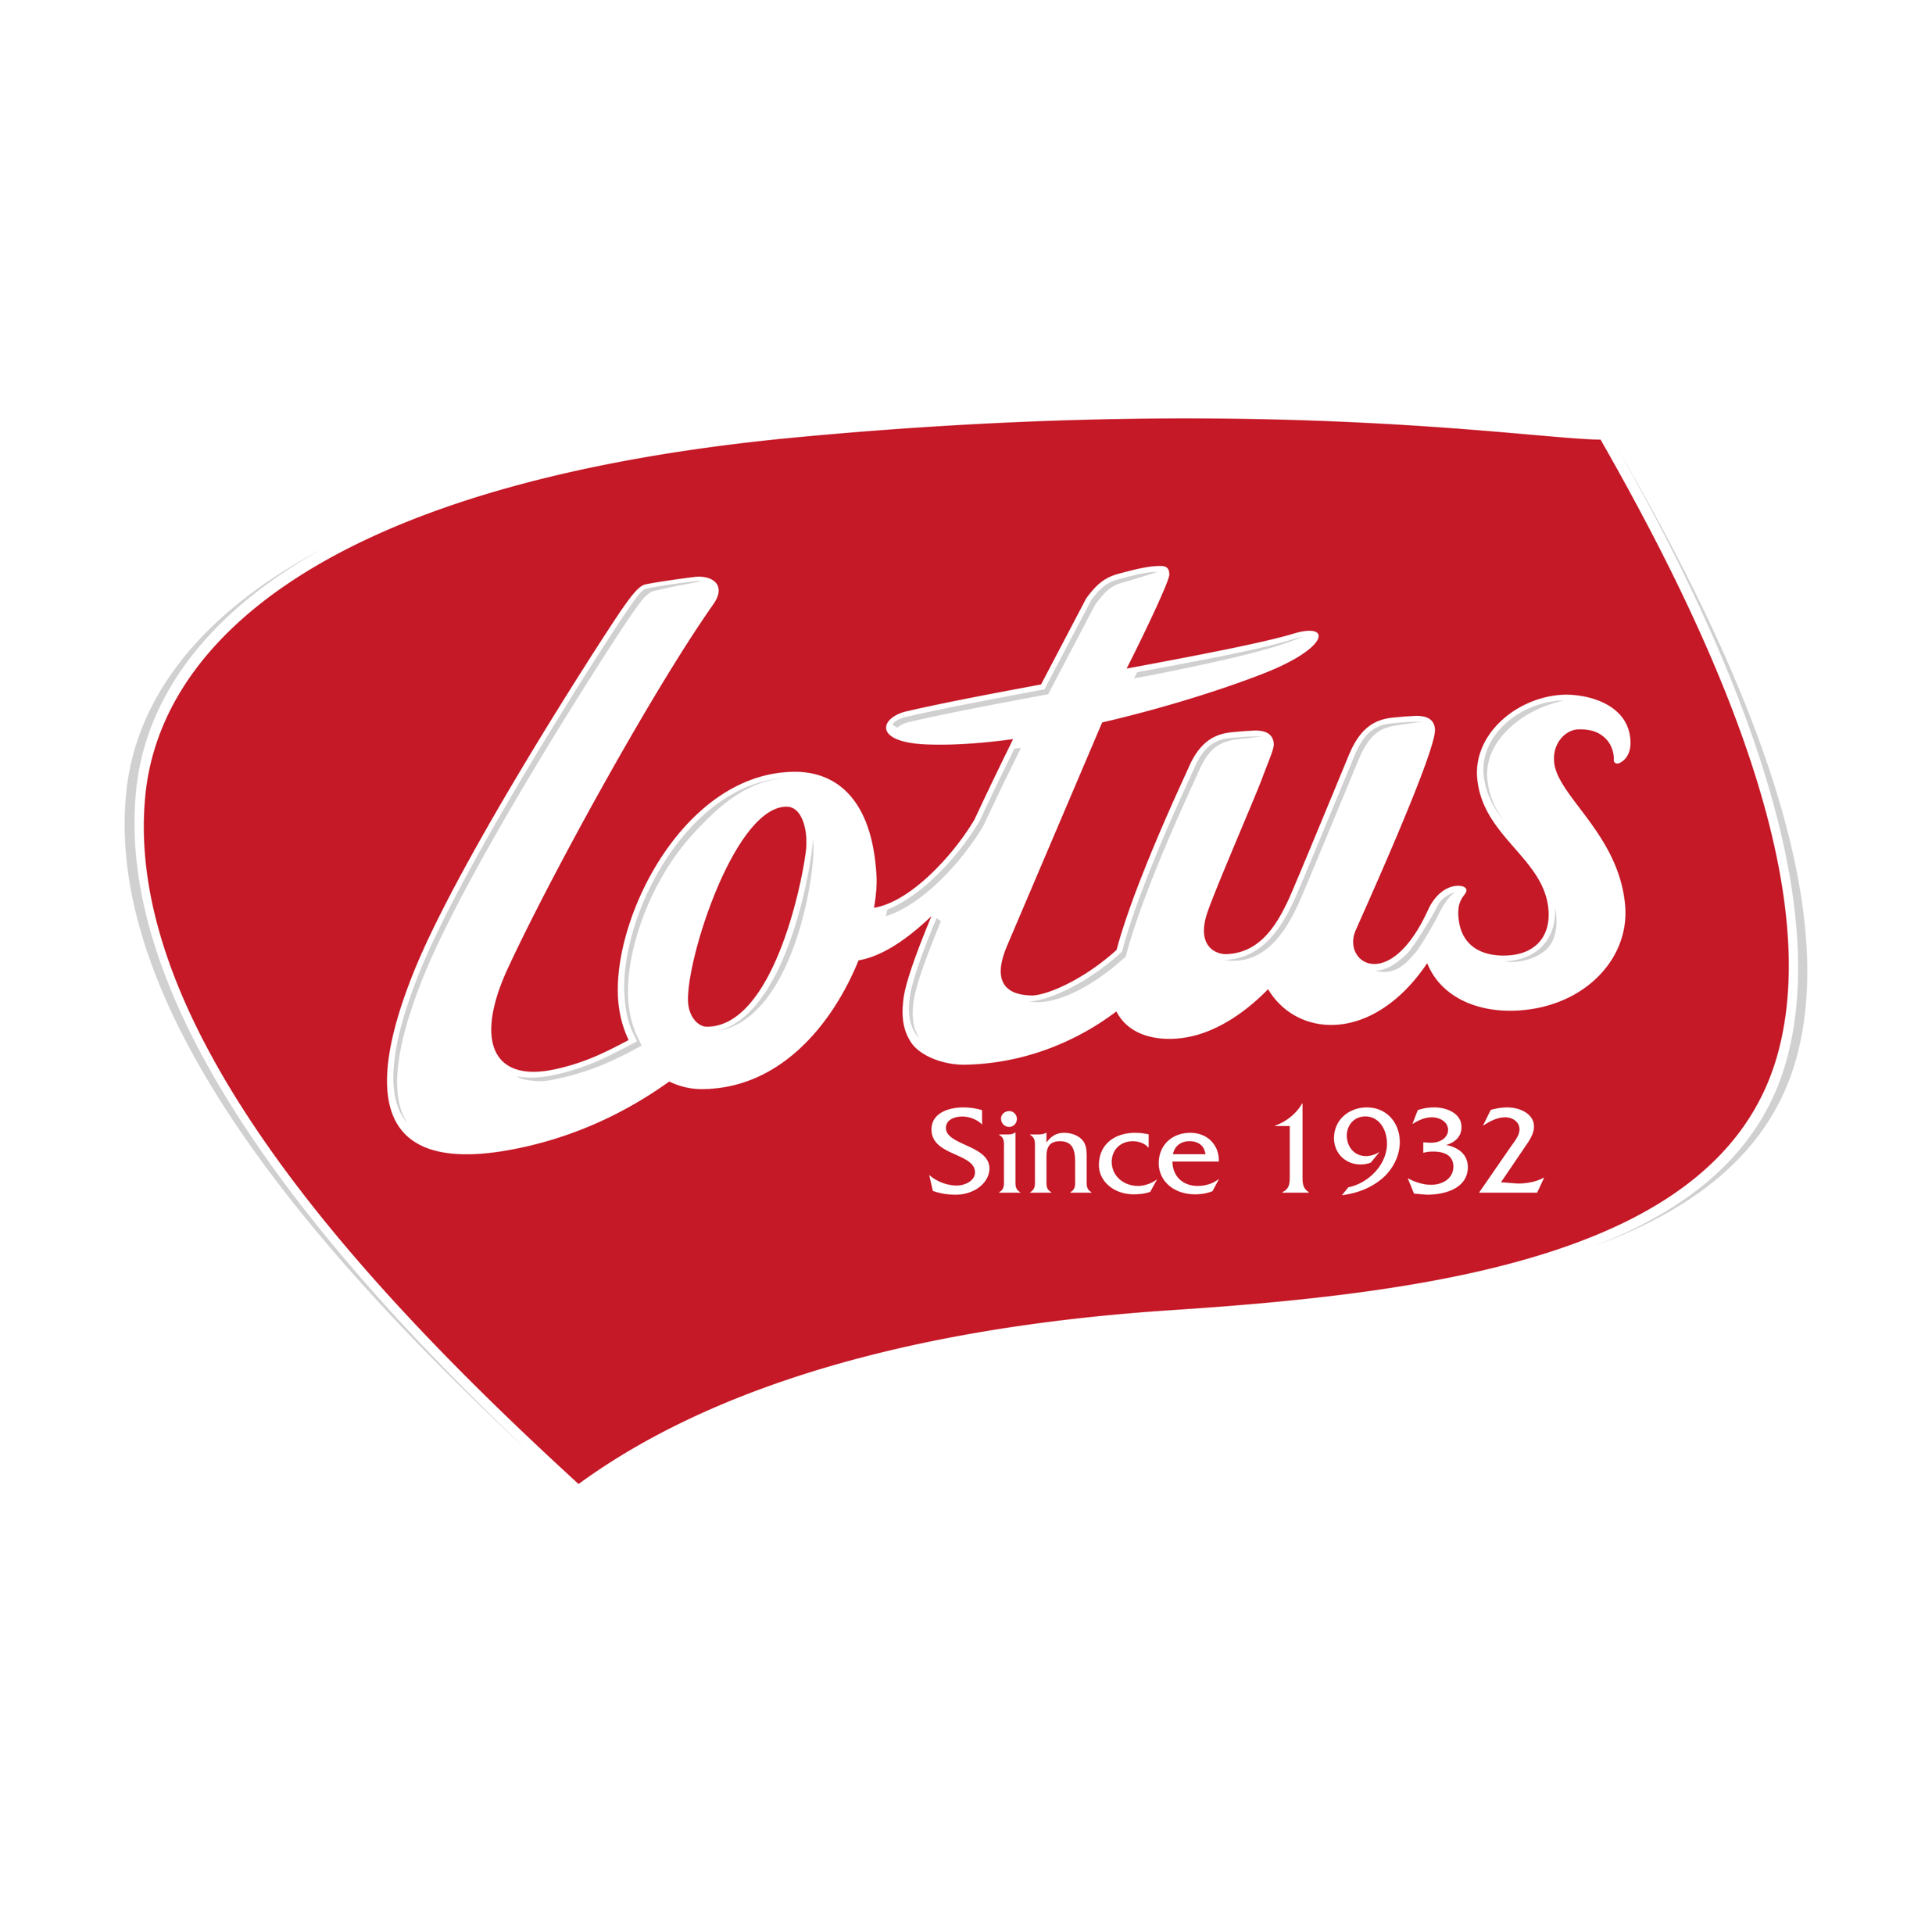 Lotus Biscoff Logo. the word Lotus on a red leaf like shape. With the words "Since 1932" below the word Lotus within the red leaf